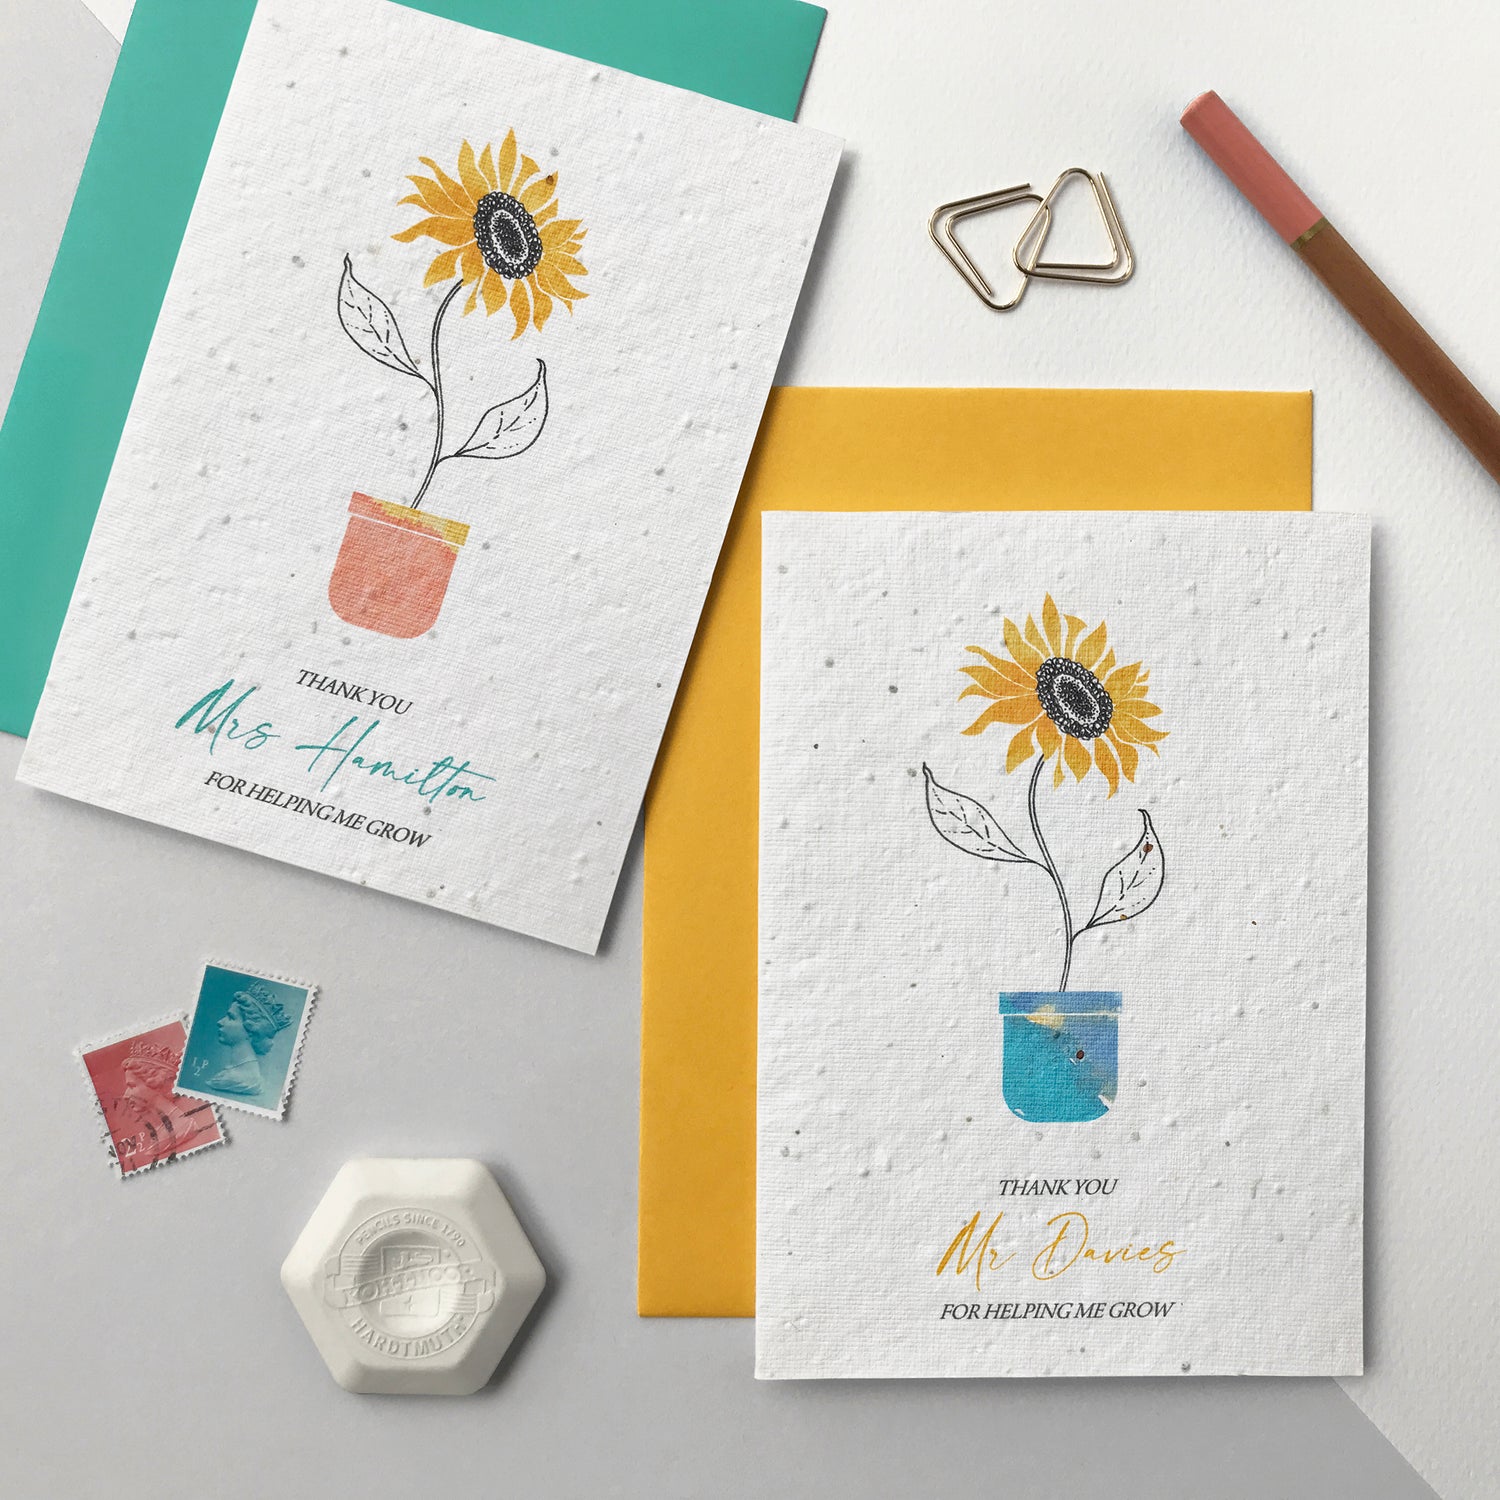 Image shows two personalised plantable seed paper thank you for helping me grow cards in mint and yellow colour options.